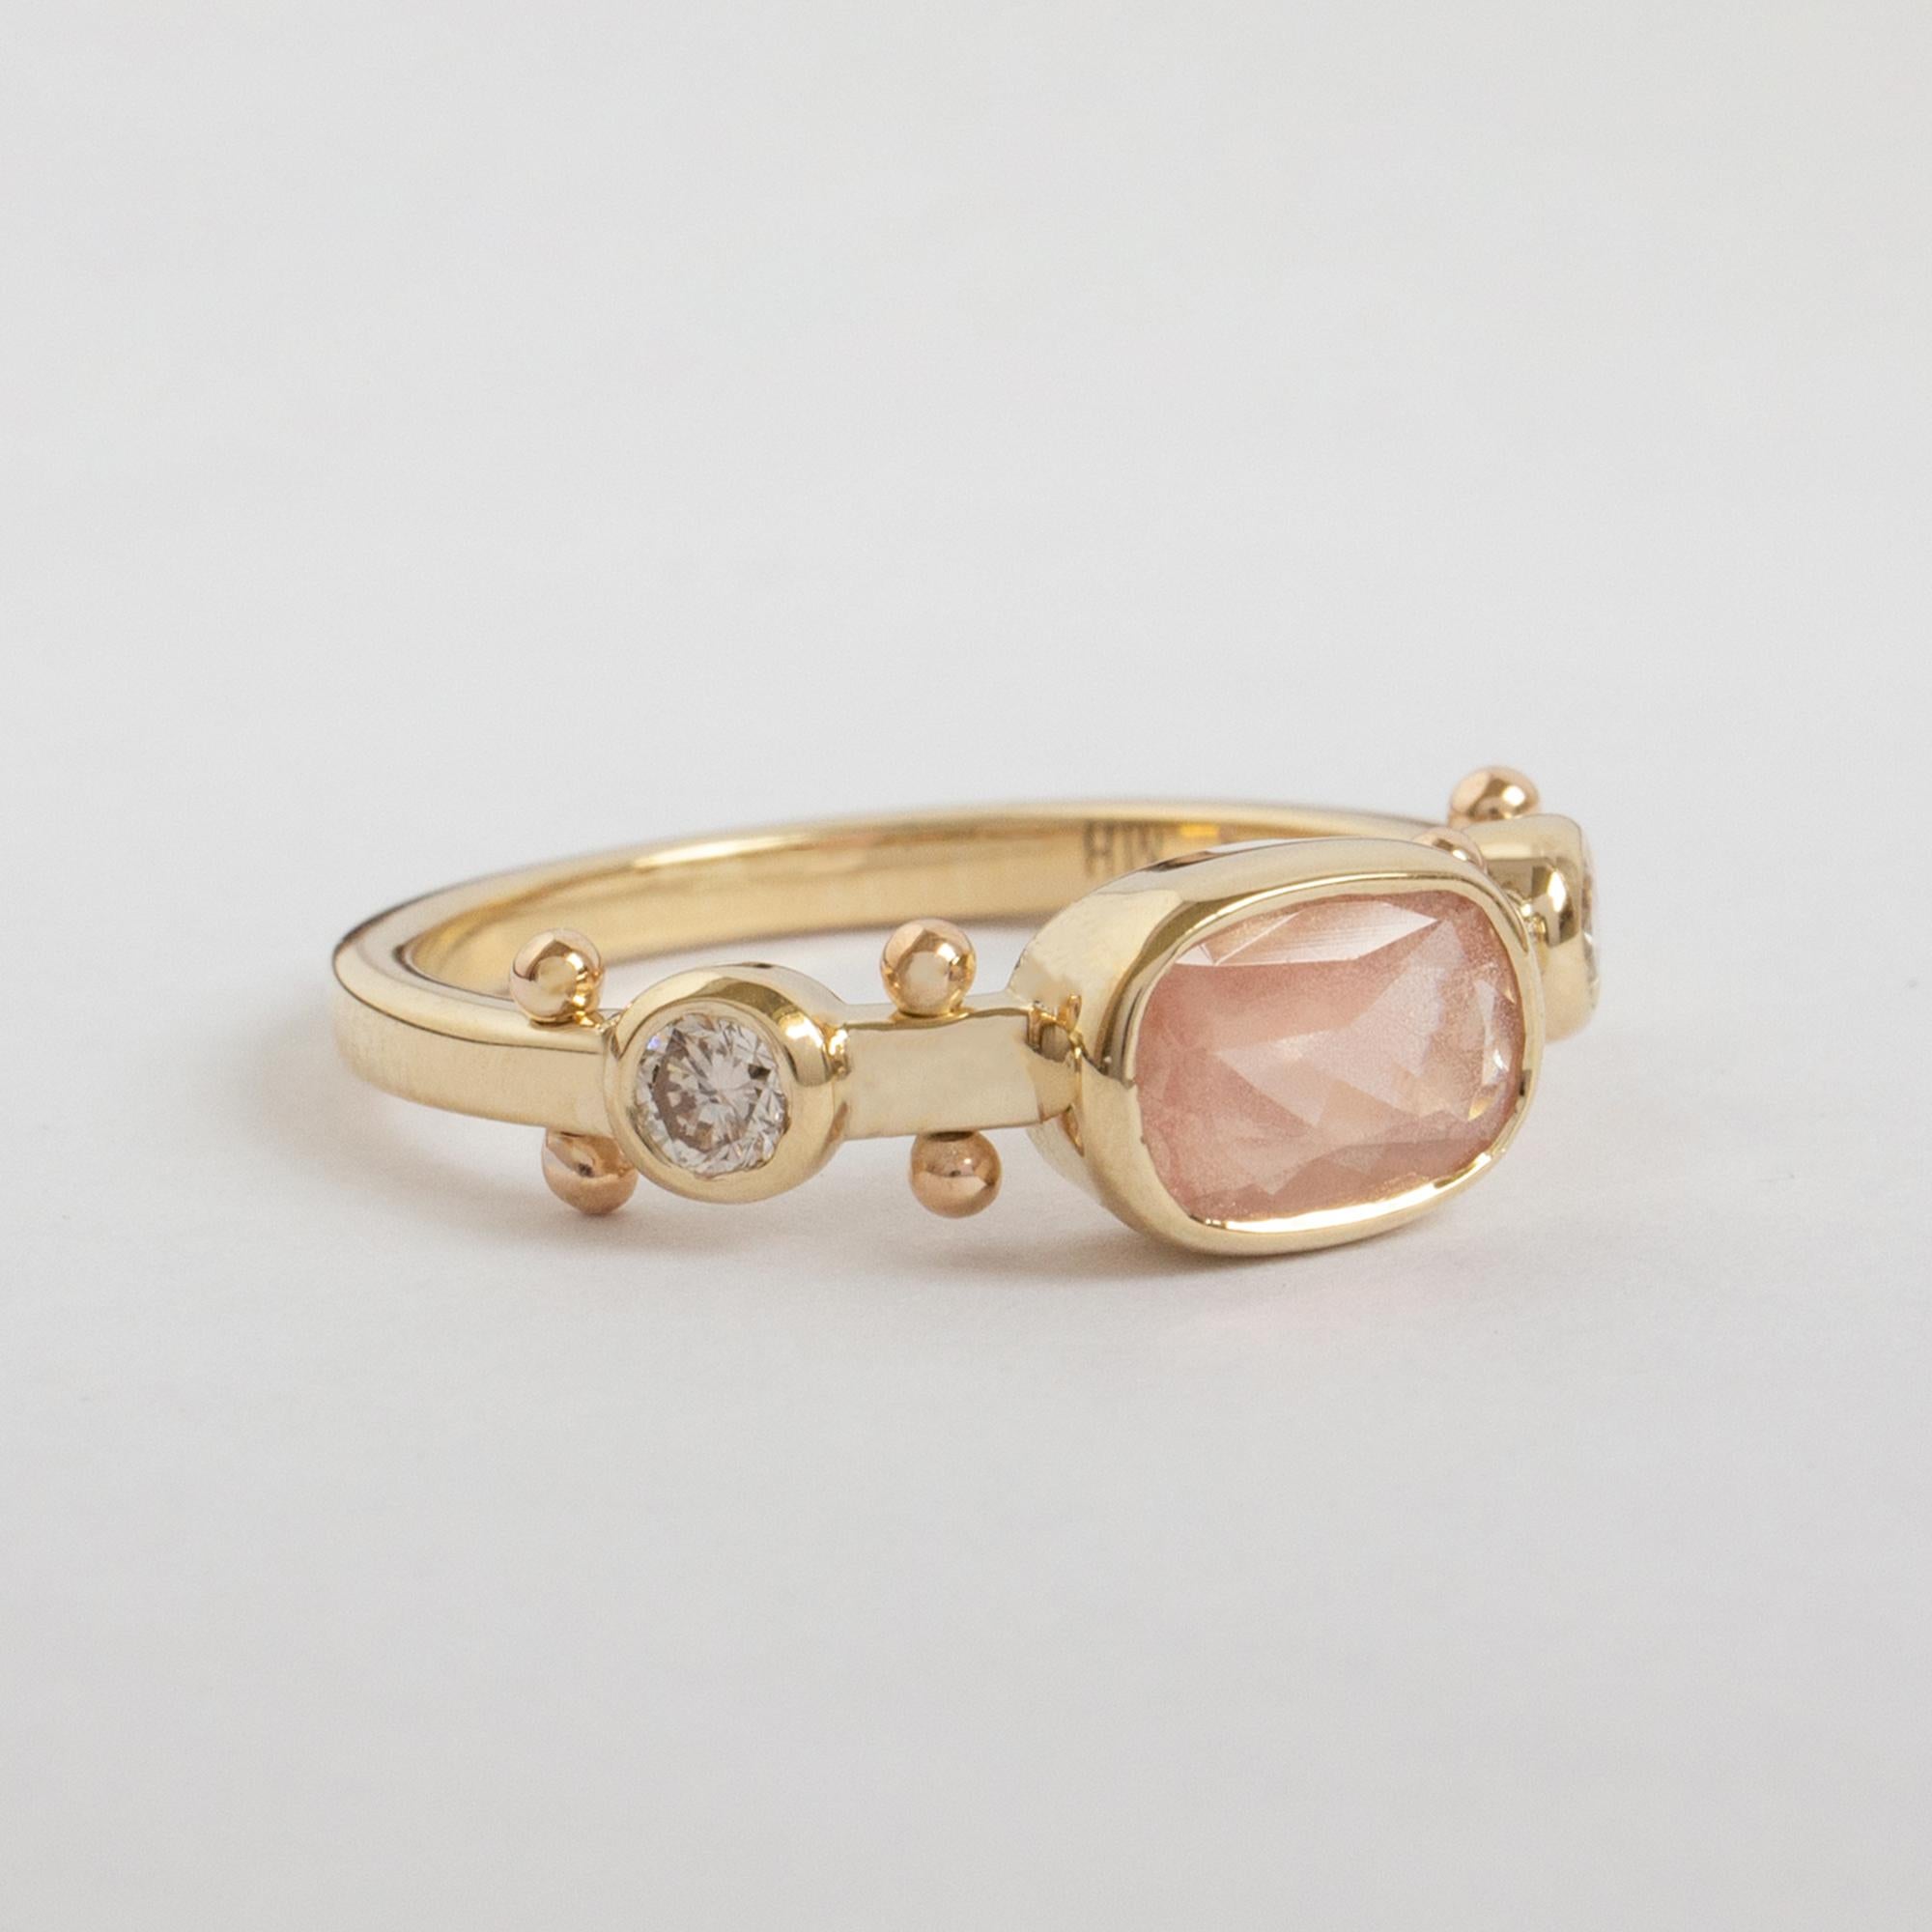 Light Pink Oregon Sunstone (natural, copper-bearing labradorite feldspar) is a sight to be seen and will uplift you immediately. Kaori, meaning fragrance in Japanese. A patchwork of sensory elements, creating a liveliness easier felt than described.